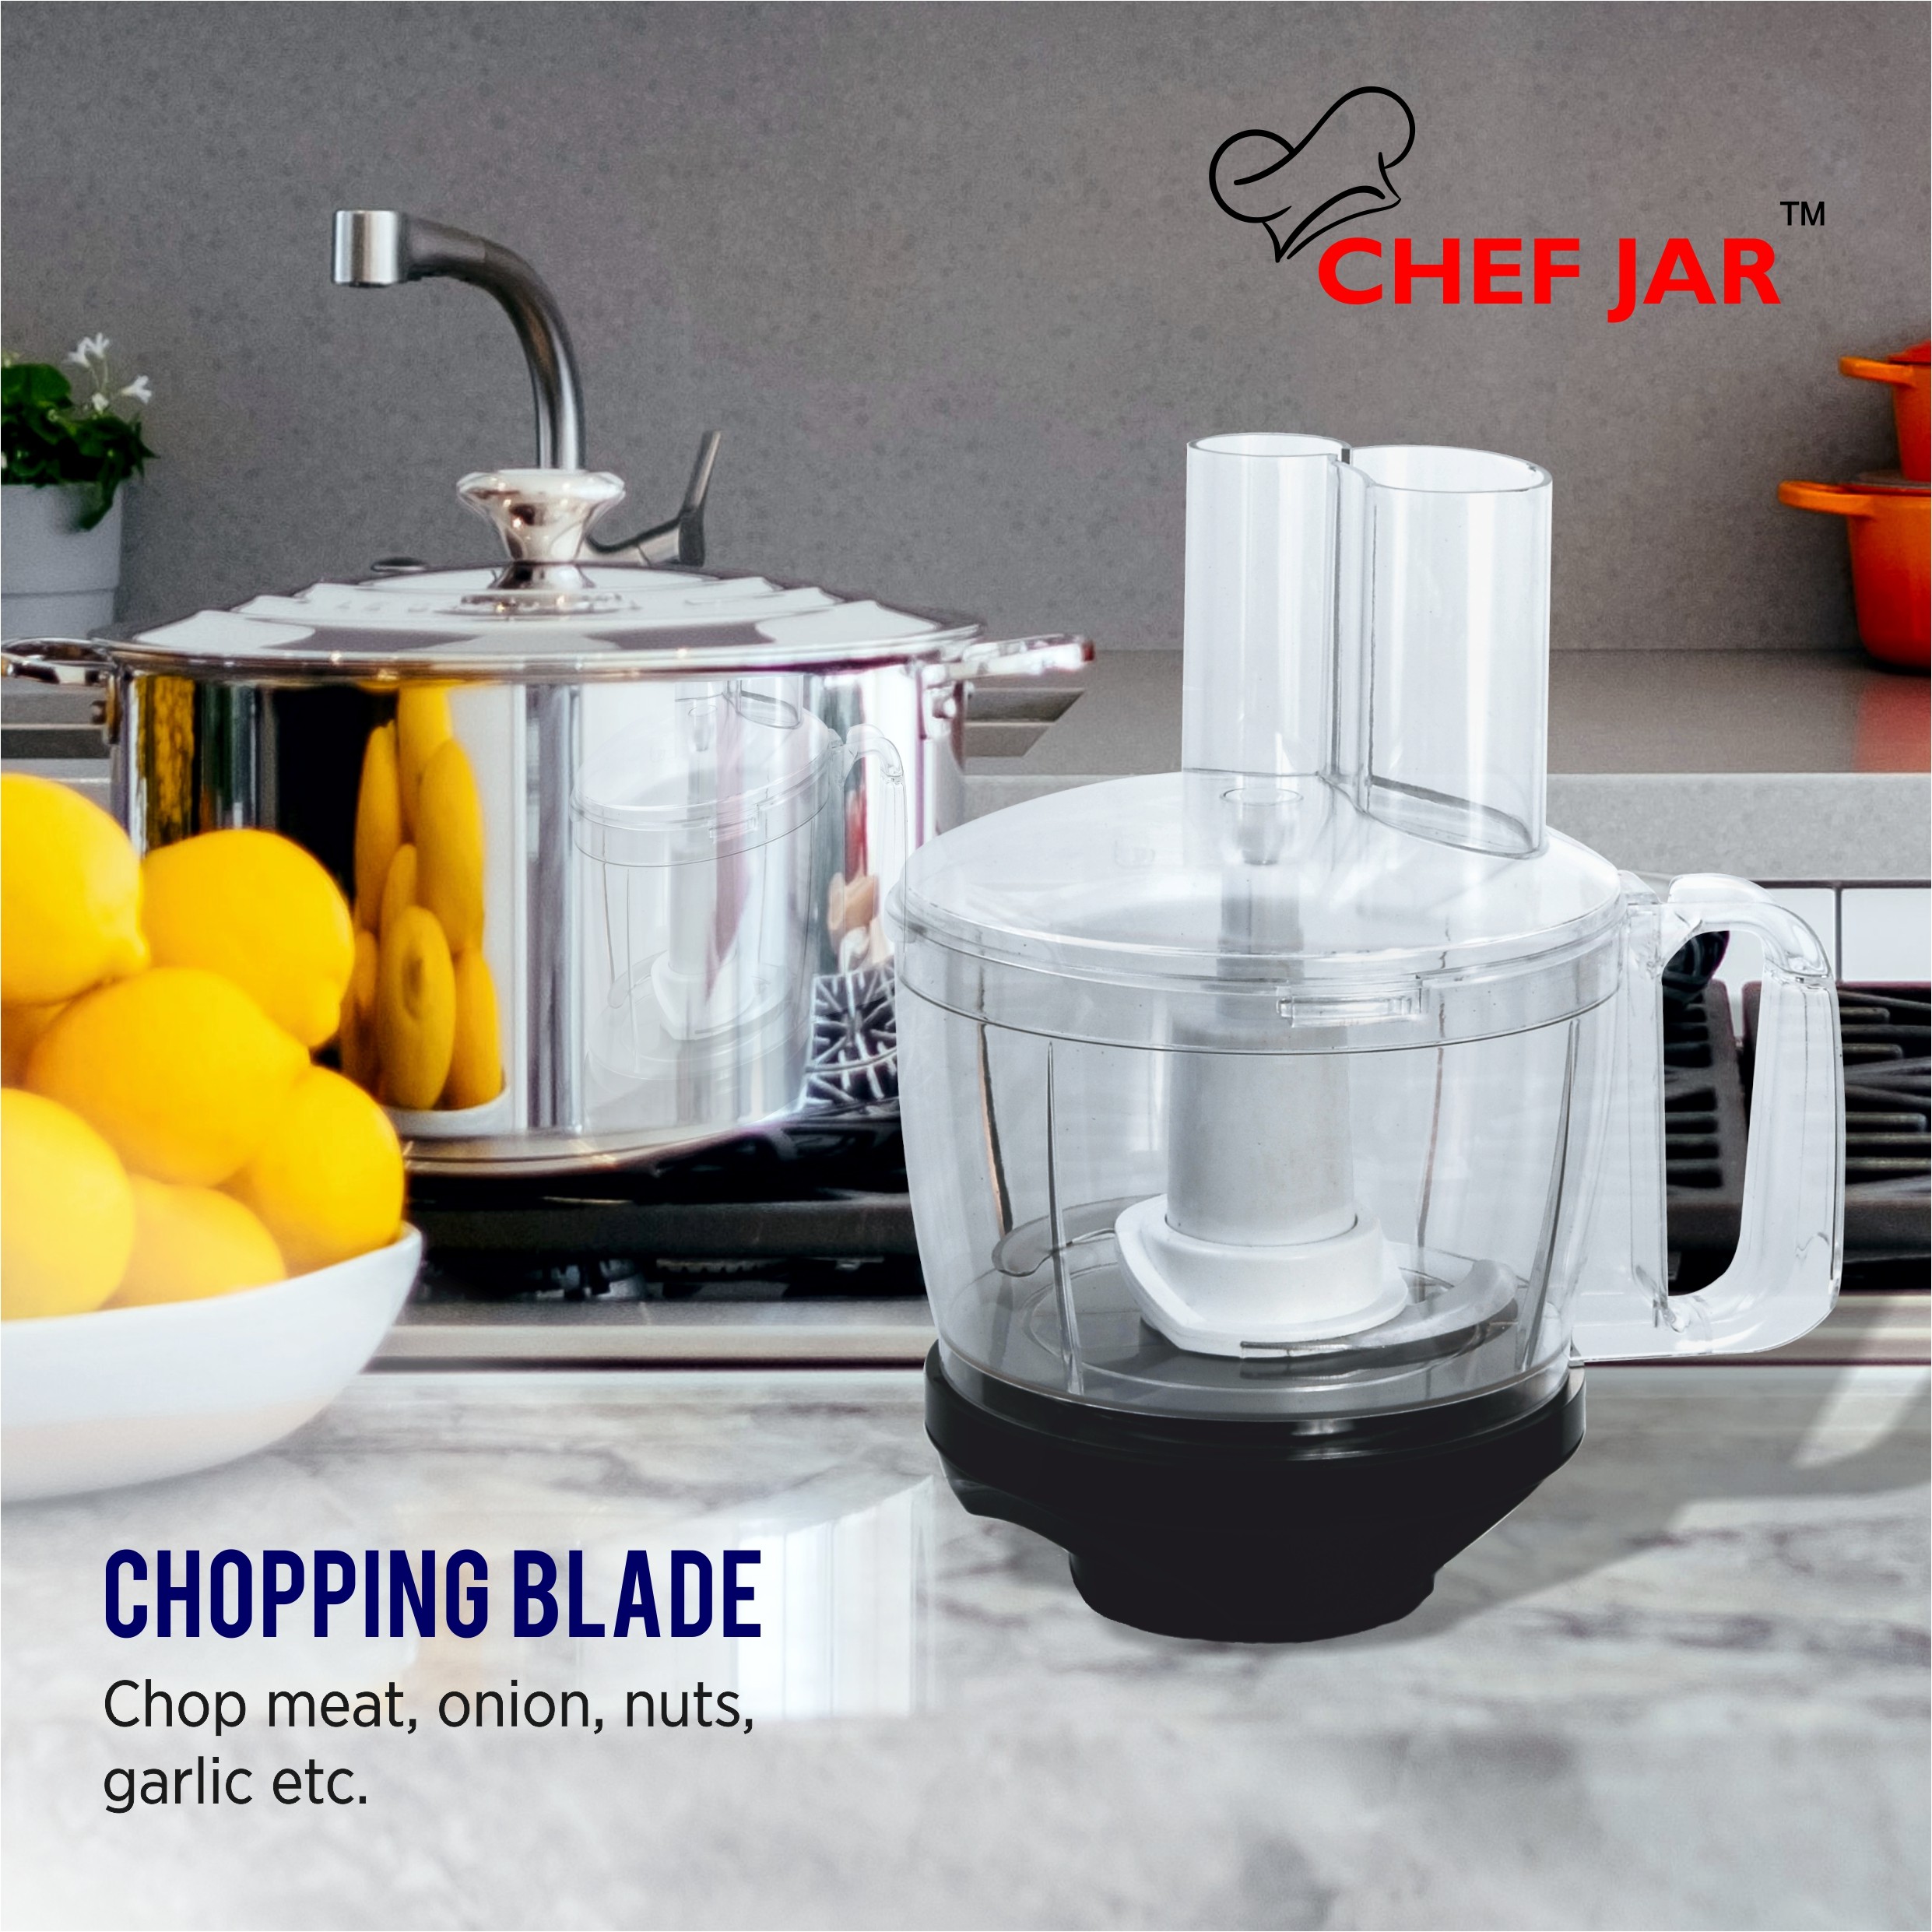 bajaj-bravo-plus-500w-indian-mixer-grinder-with-special-chef-jar-stainless-steel-jars-indian-mixer-grinder-spice-coffee-grinder-110v-for-use-in-canada-usa9